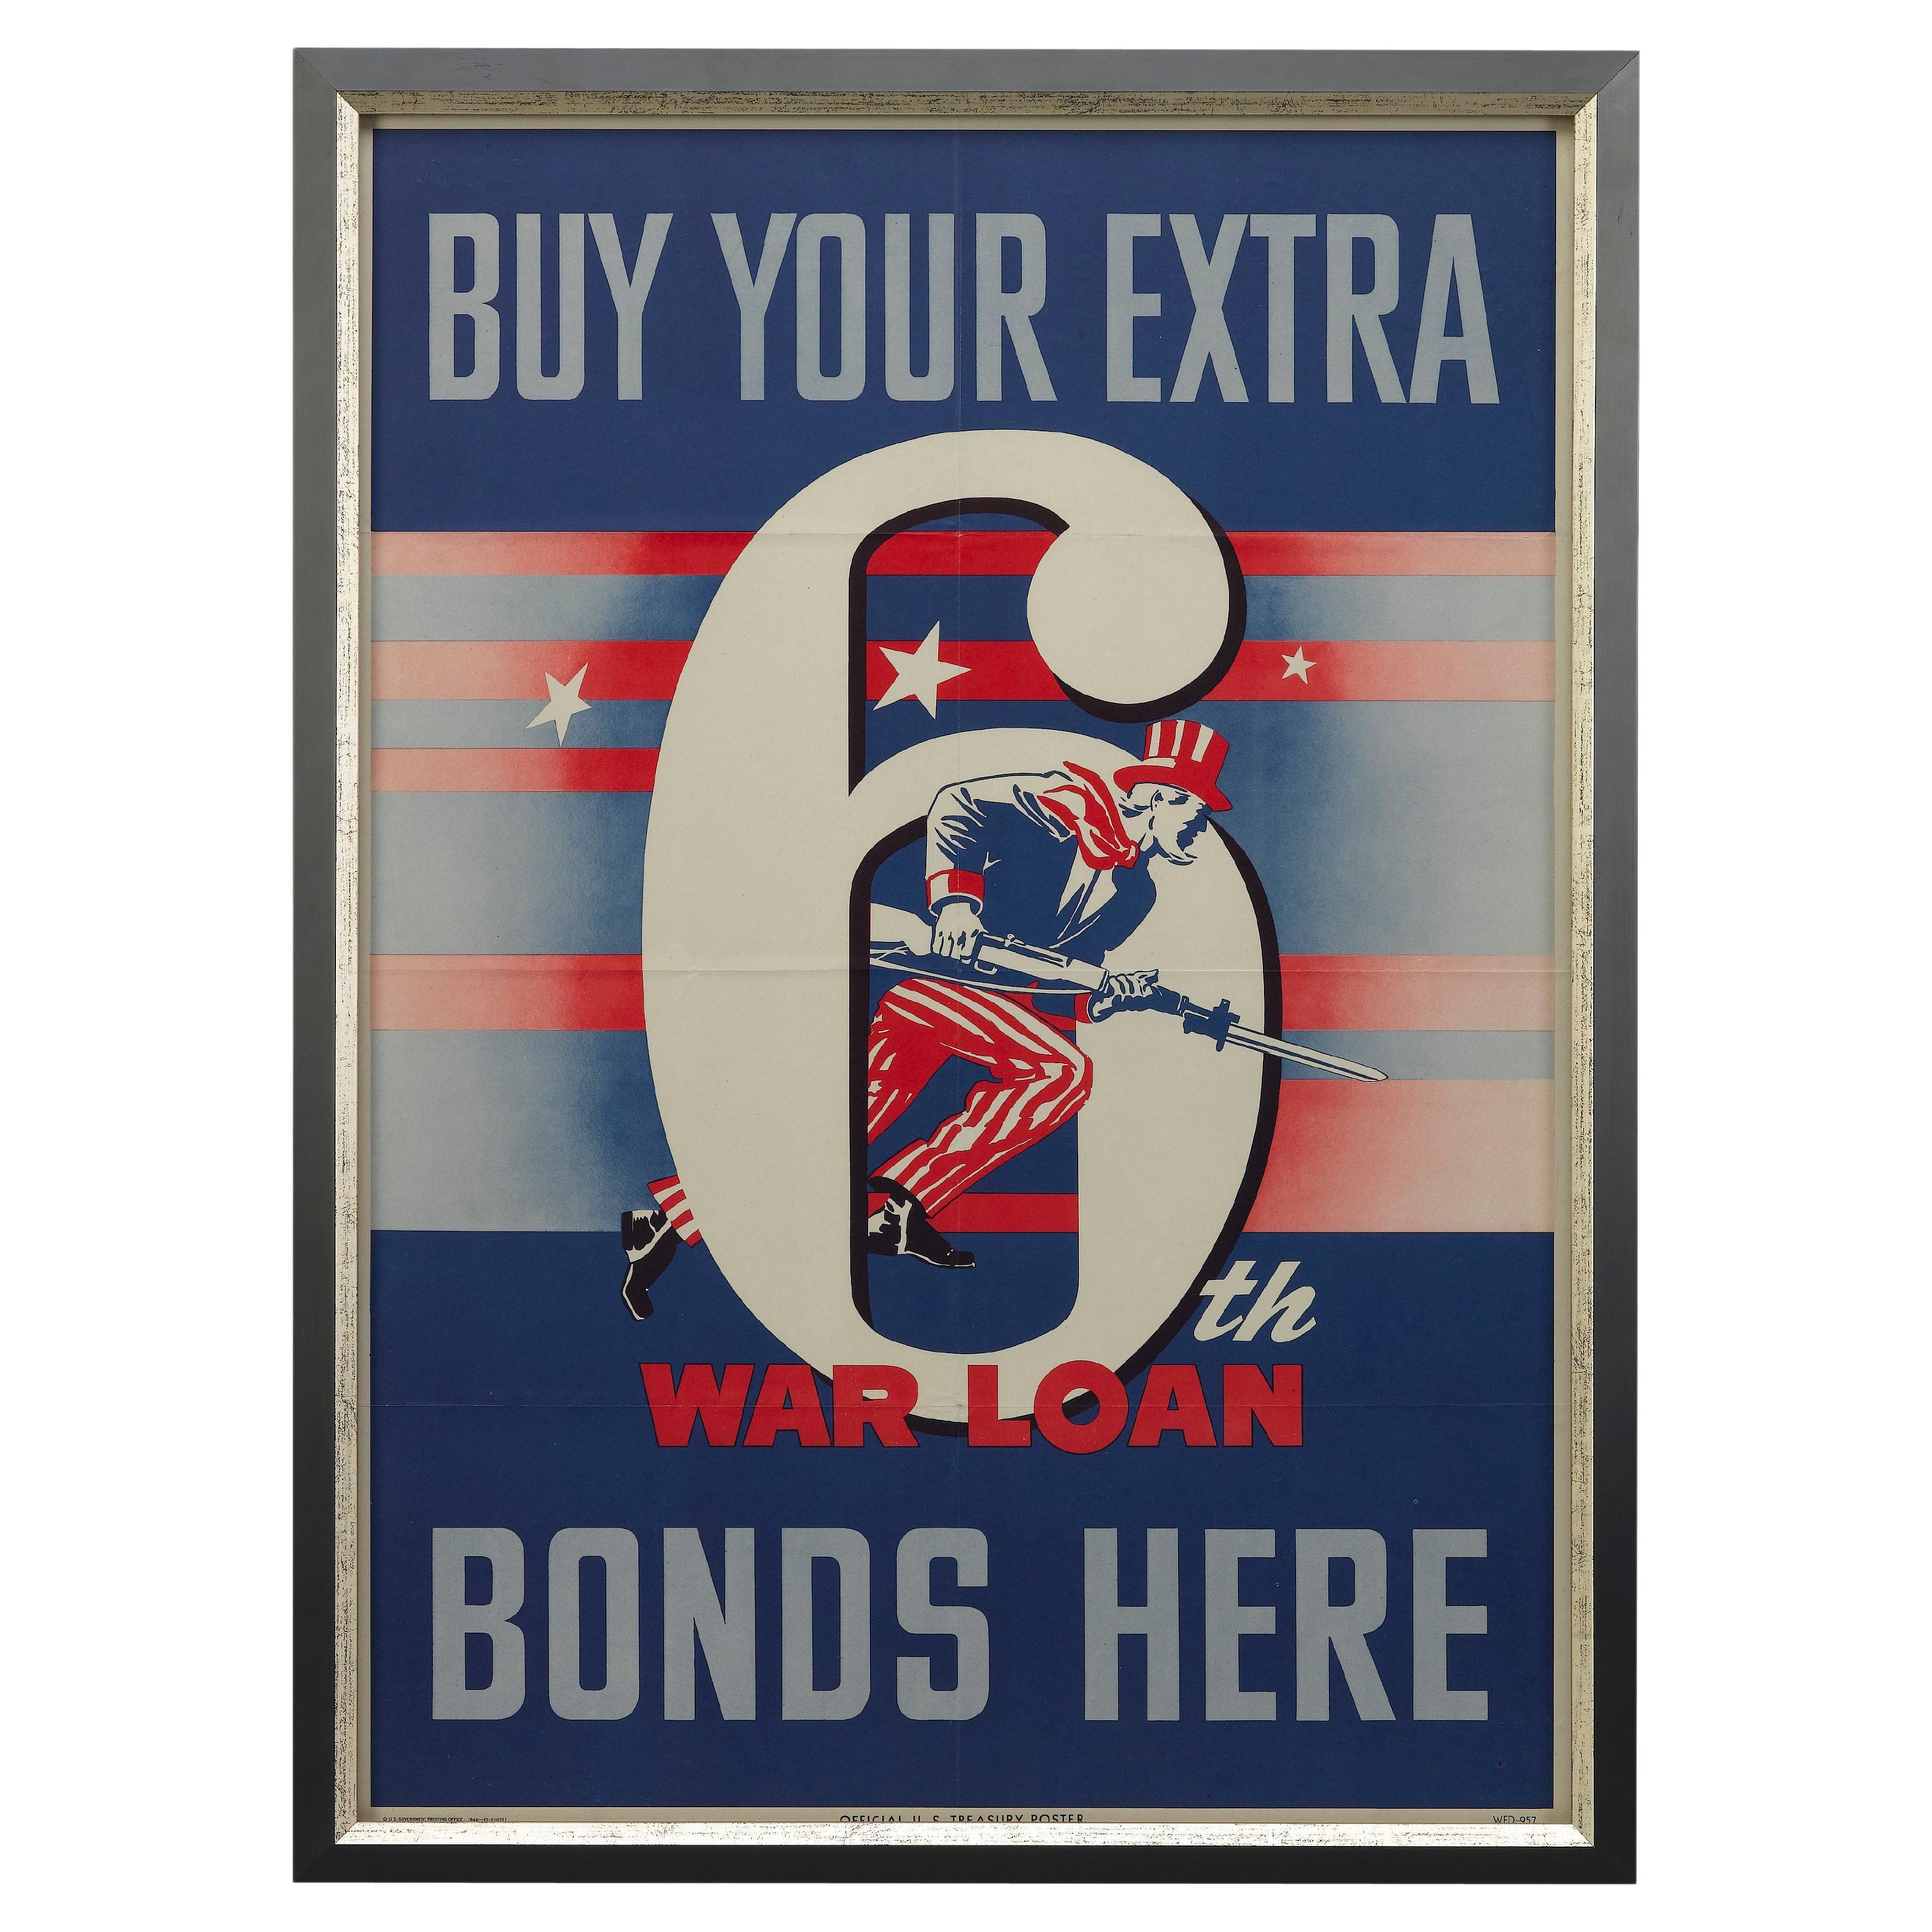 „“Buy Your Extra 6th War Loan Bonds Here““ Vintage-WWII-Poster, 1944